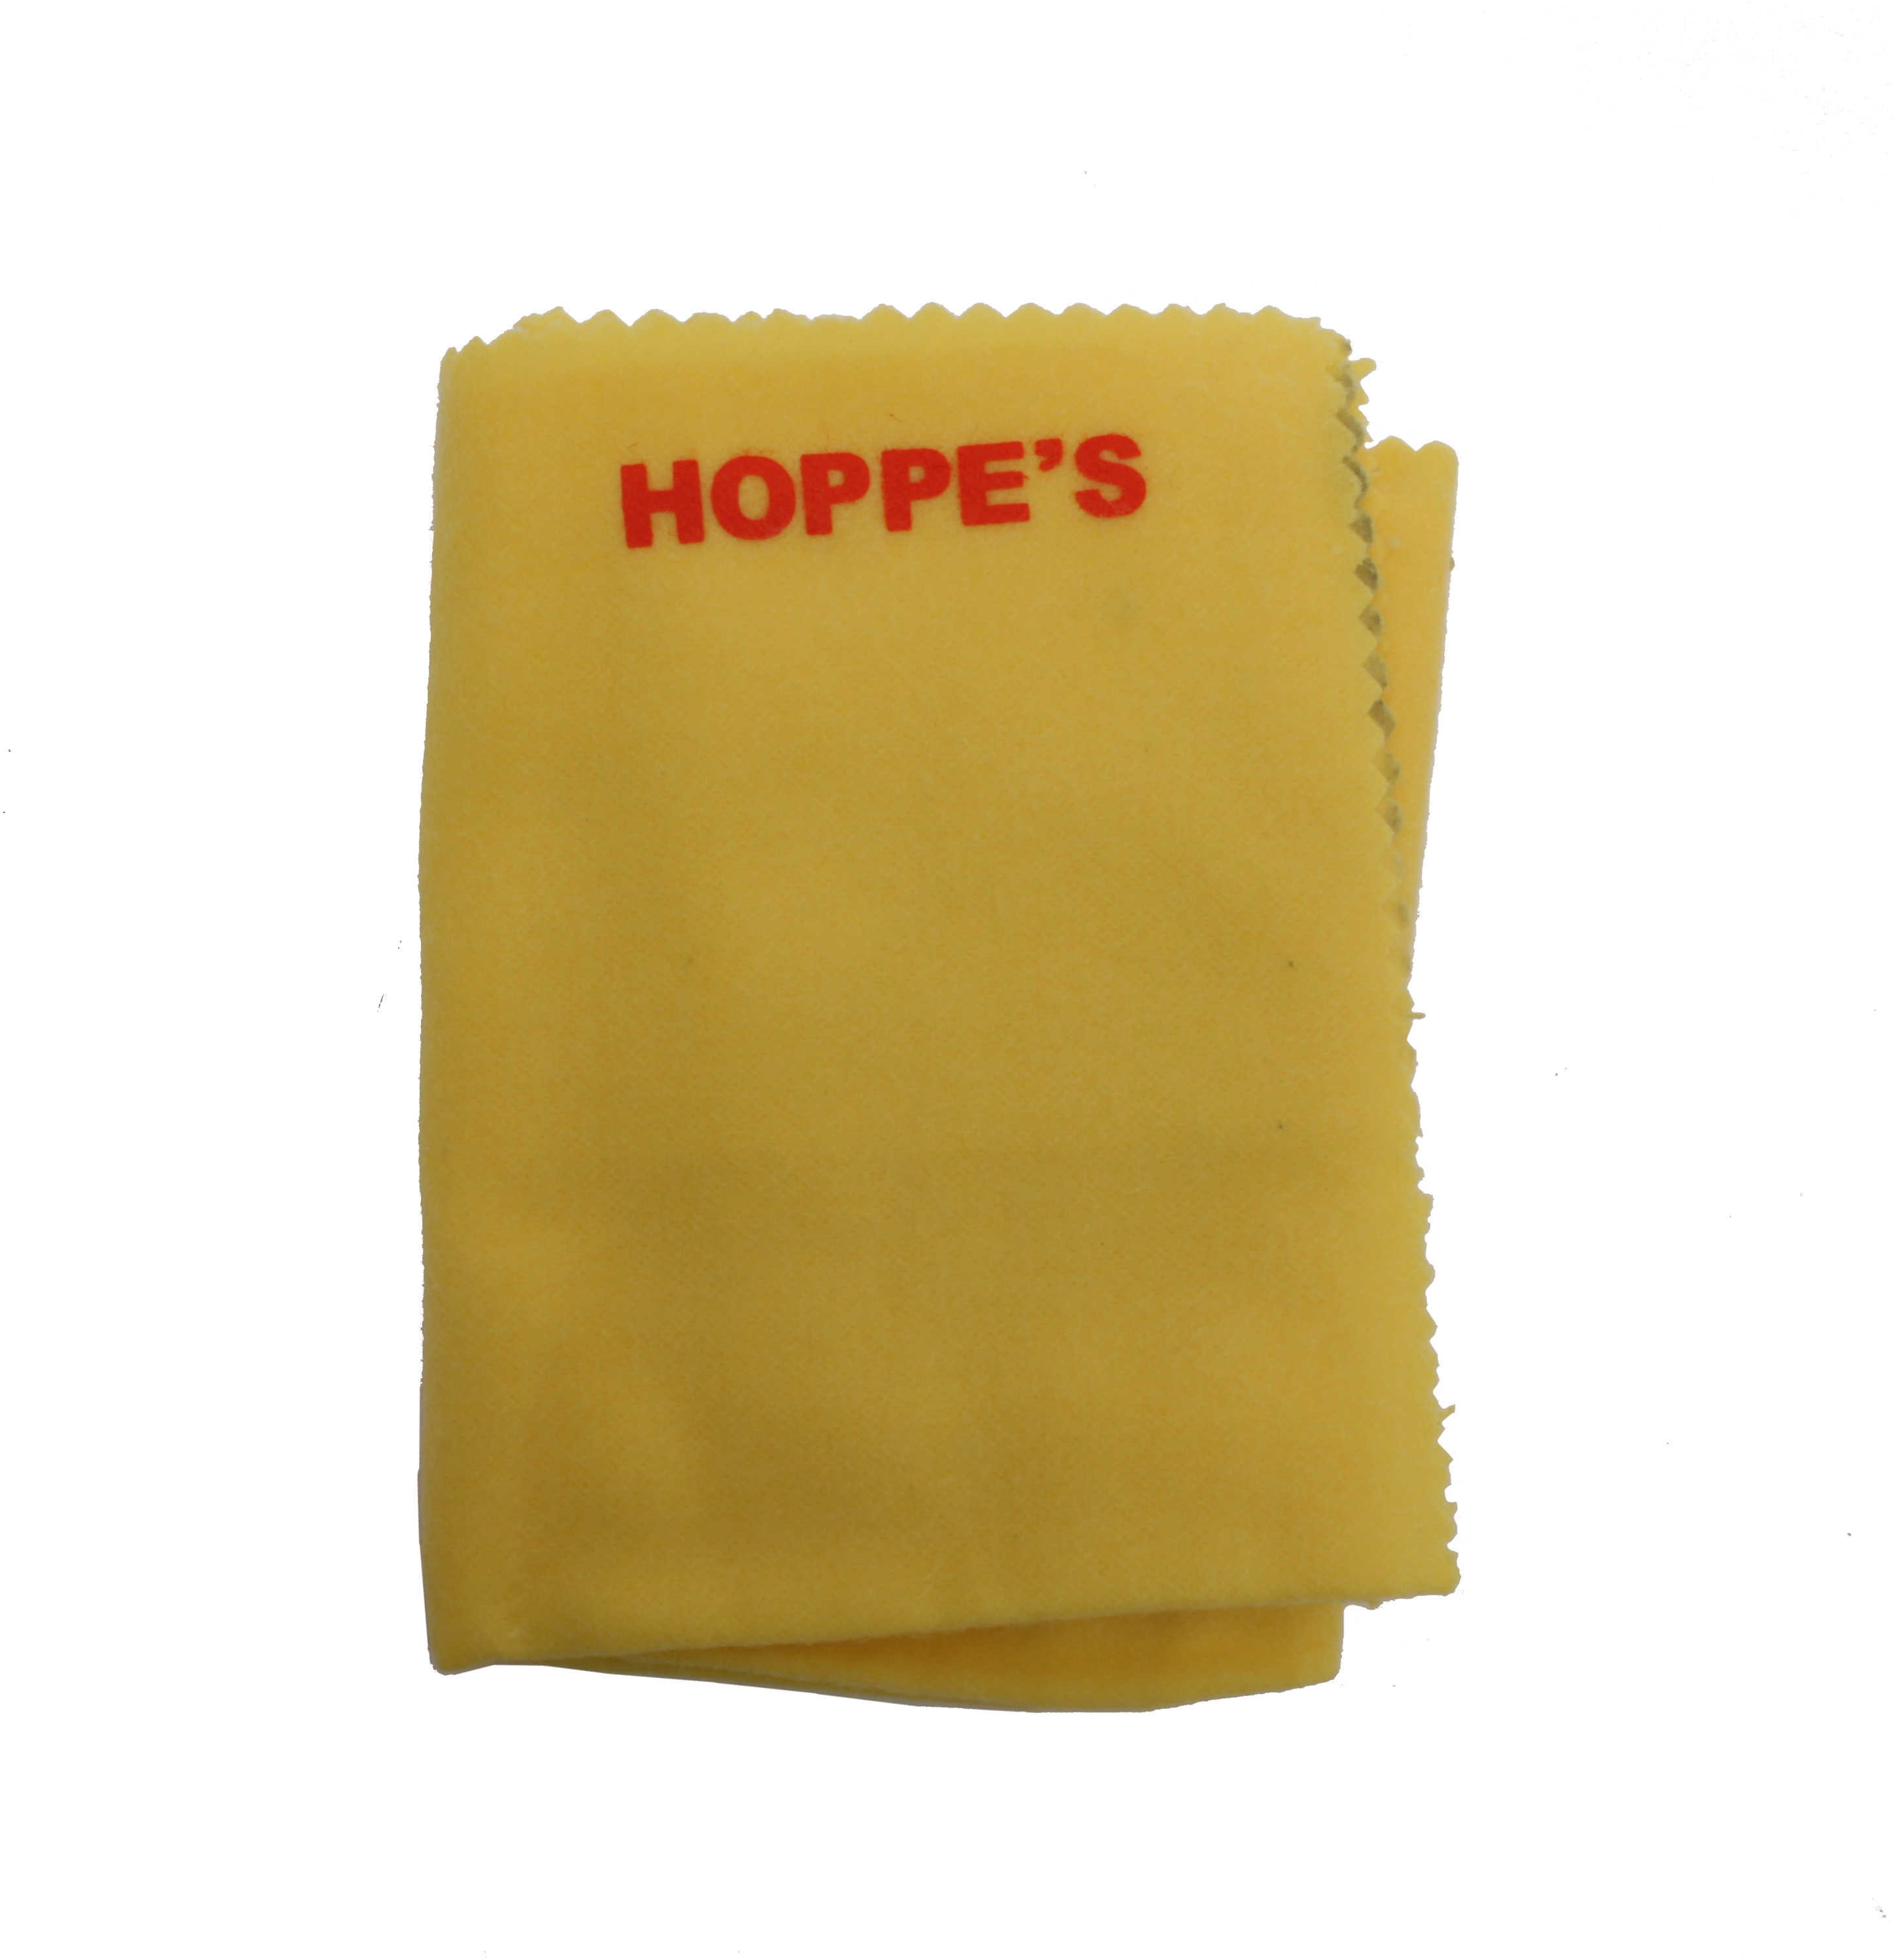 Hoppes Wax Treated Gun Cloth For a Polished, Professional Finish On Wooden Stocks - Cleans, polishes & protects In a Si